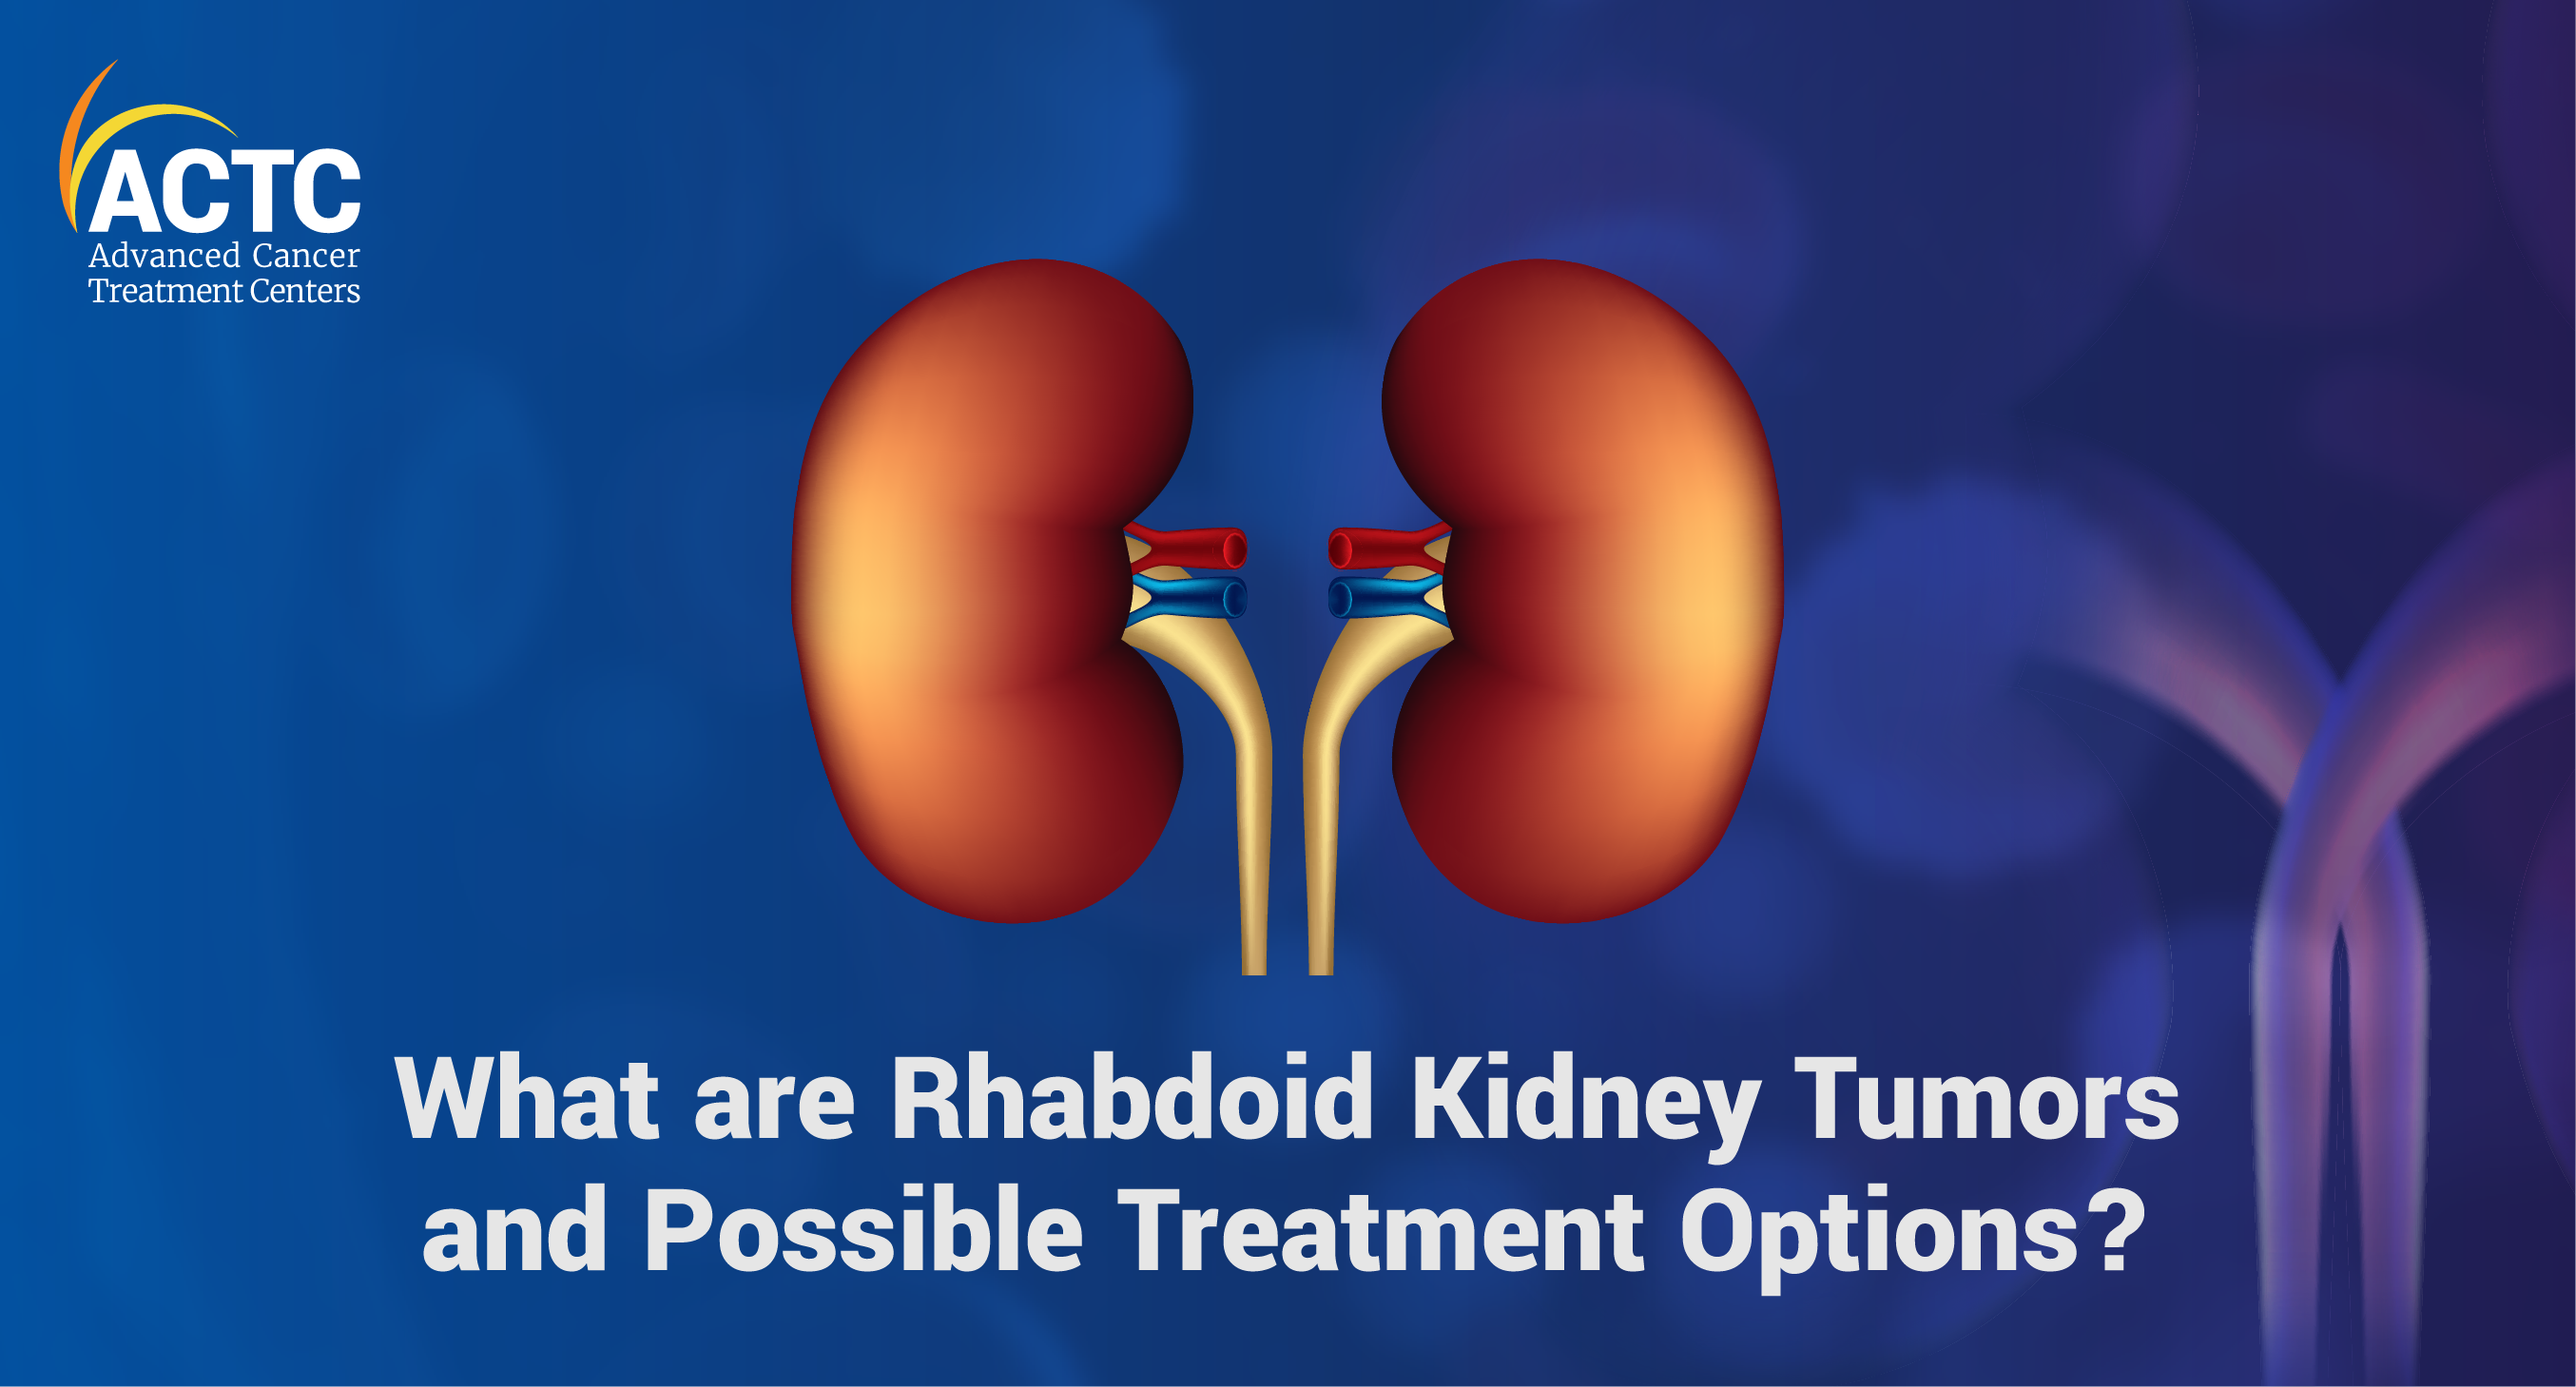 What are Rhabdoid Kidney Tumors and Possible Treatment Options? 